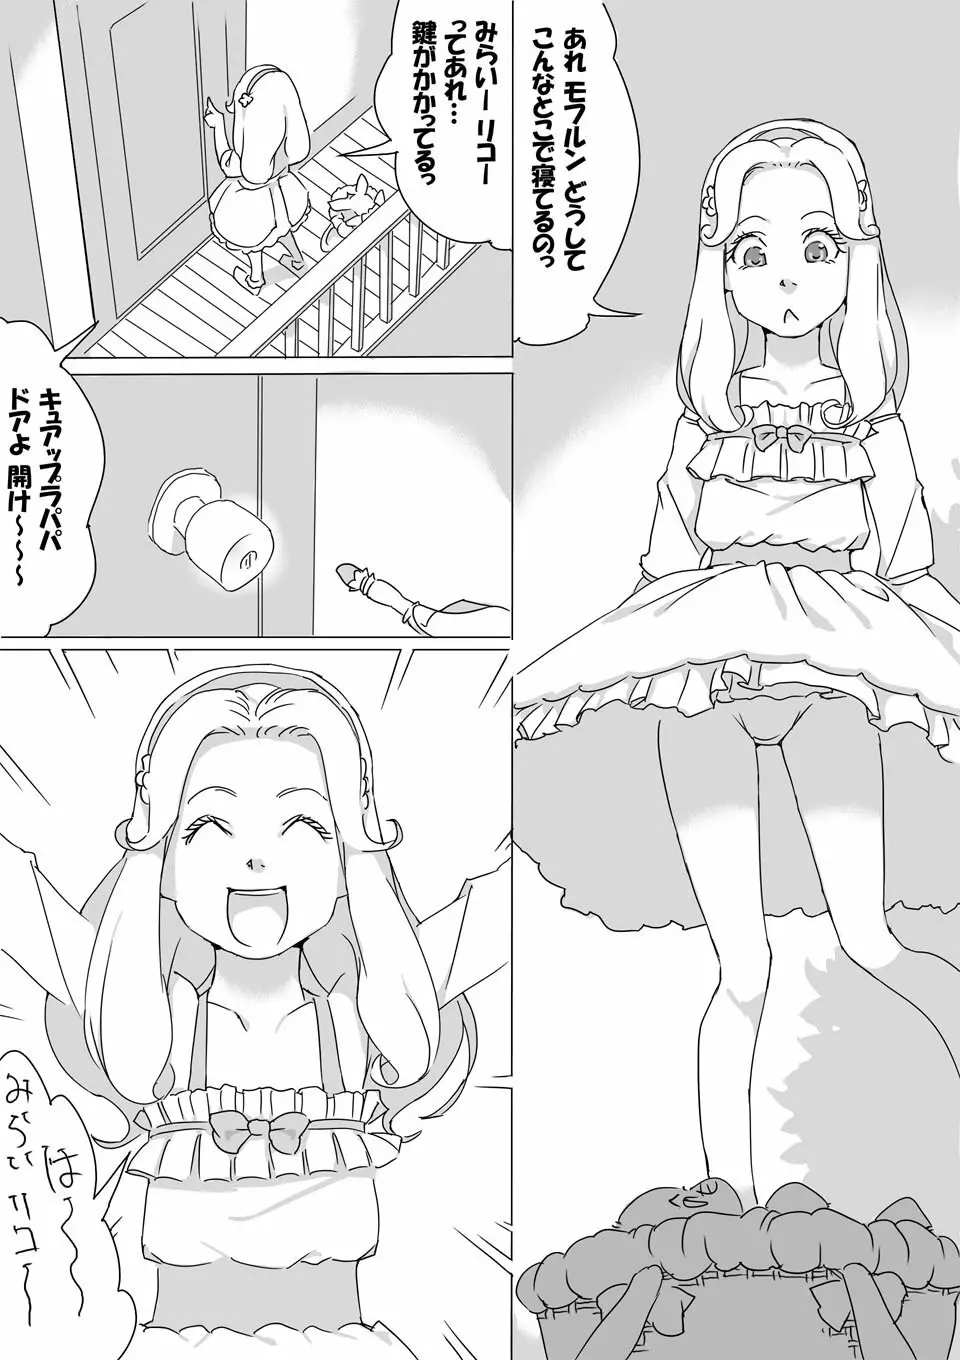 Untitled Precure Doujinshi - page13